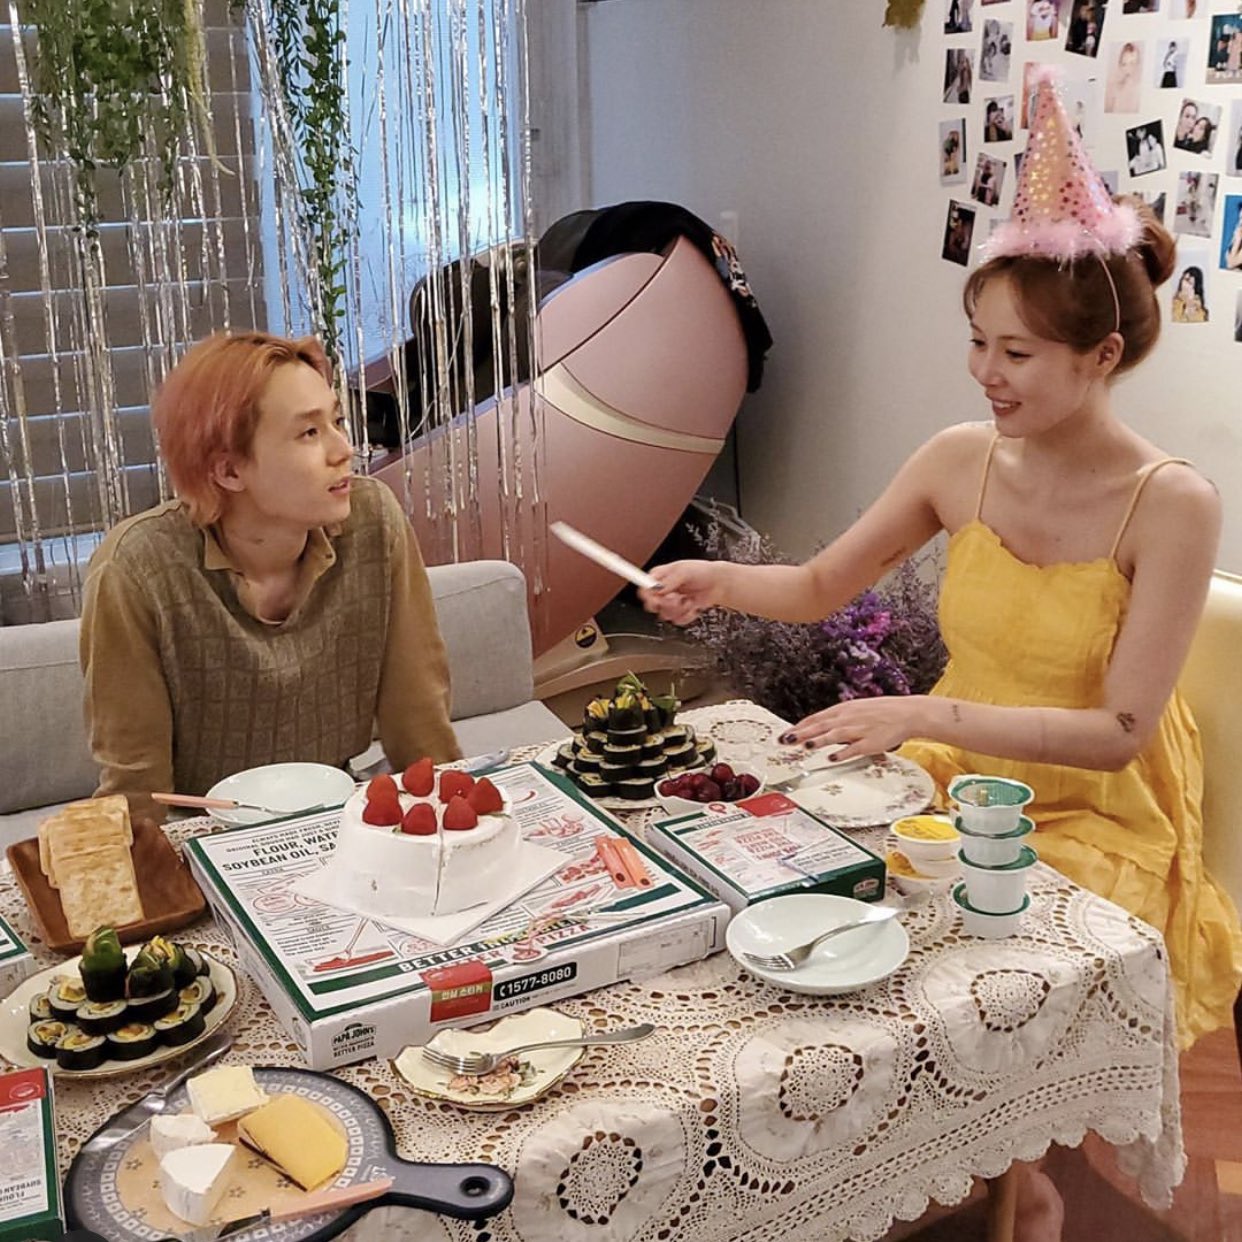 hyun-a-shares-romantic-moments-in-her-soon-birthday-party-with-e'dawn-4